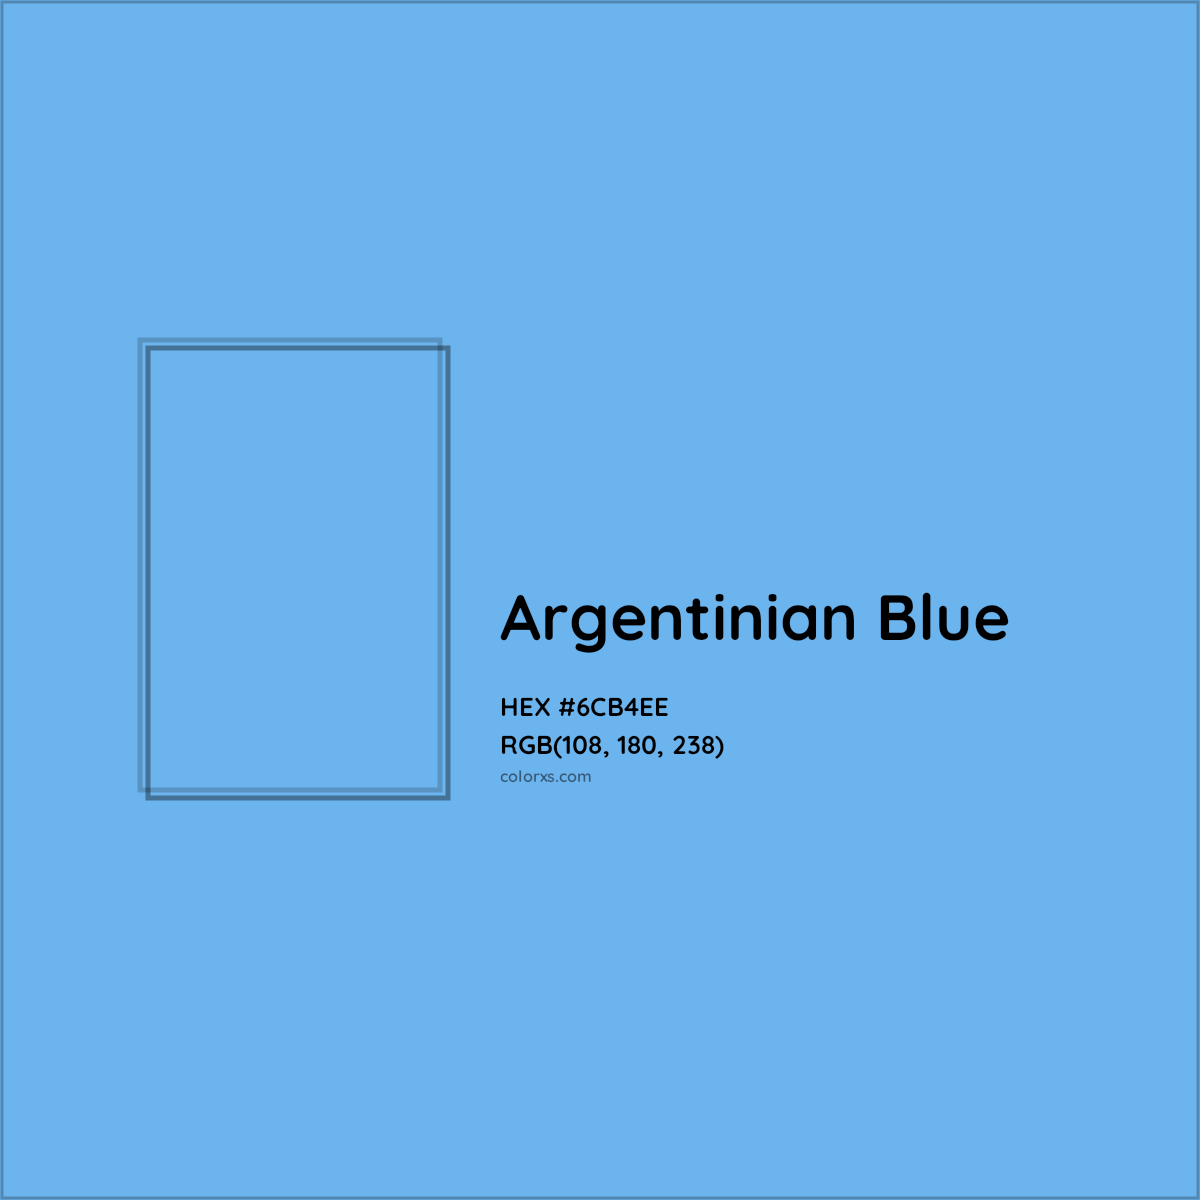 HEX #6CB4EE Argentinian Blue Other Flag - Color Code